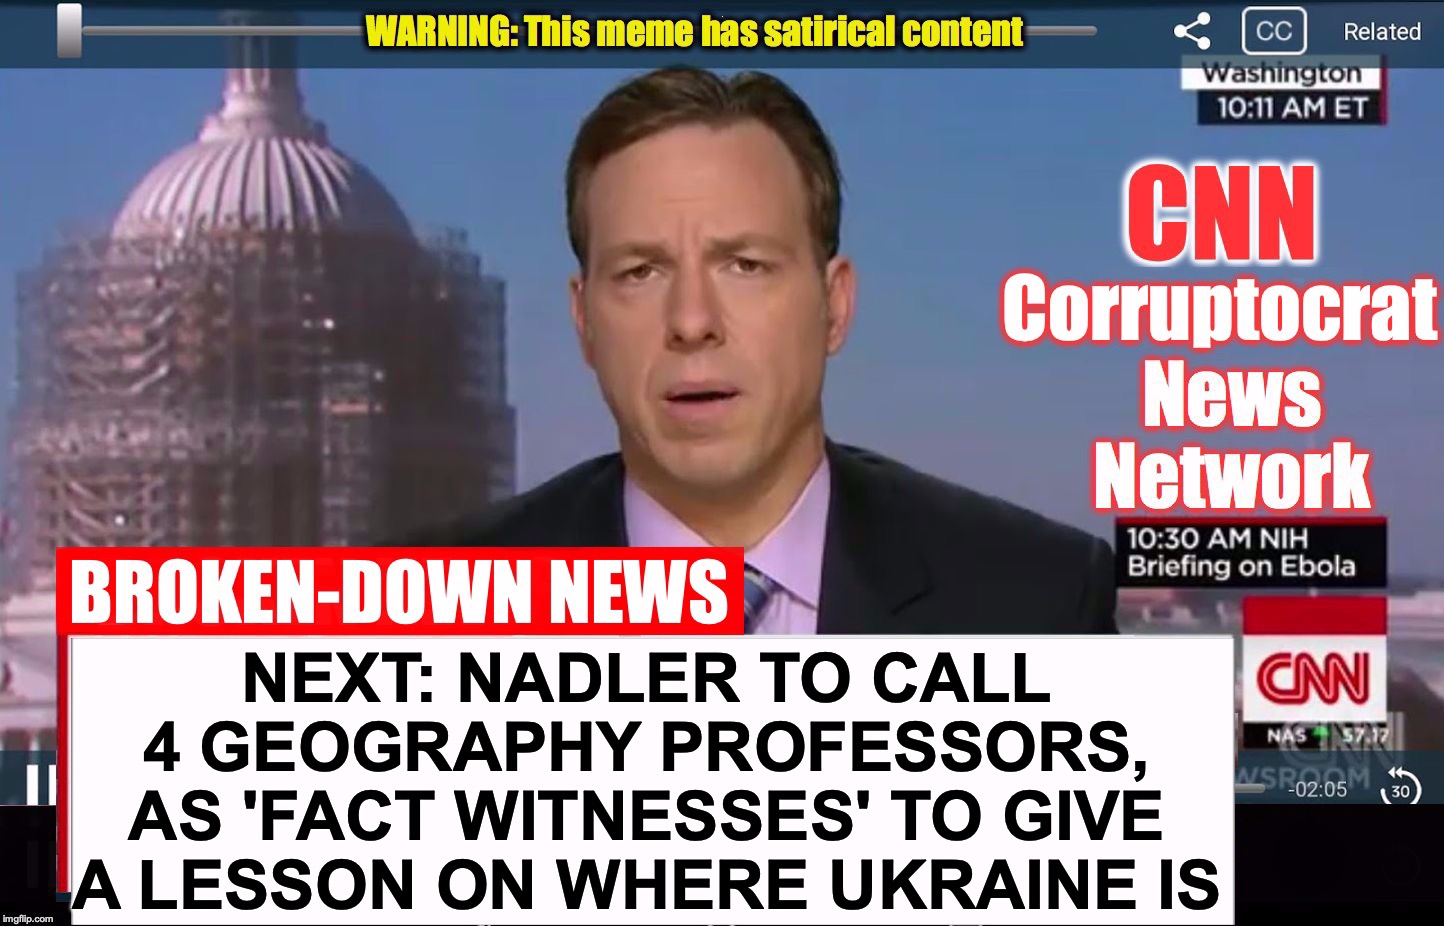 CNN Corruptocrat News Network | NEXT: NADLER TO CALL 4 GEOGRAPHY PROFESSORS, AS 'FACT WITNESSES' TO GIVE A LESSON ON WHERE UKRAINE IS | image tagged in cnn corruptocrat news network | made w/ Imgflip meme maker